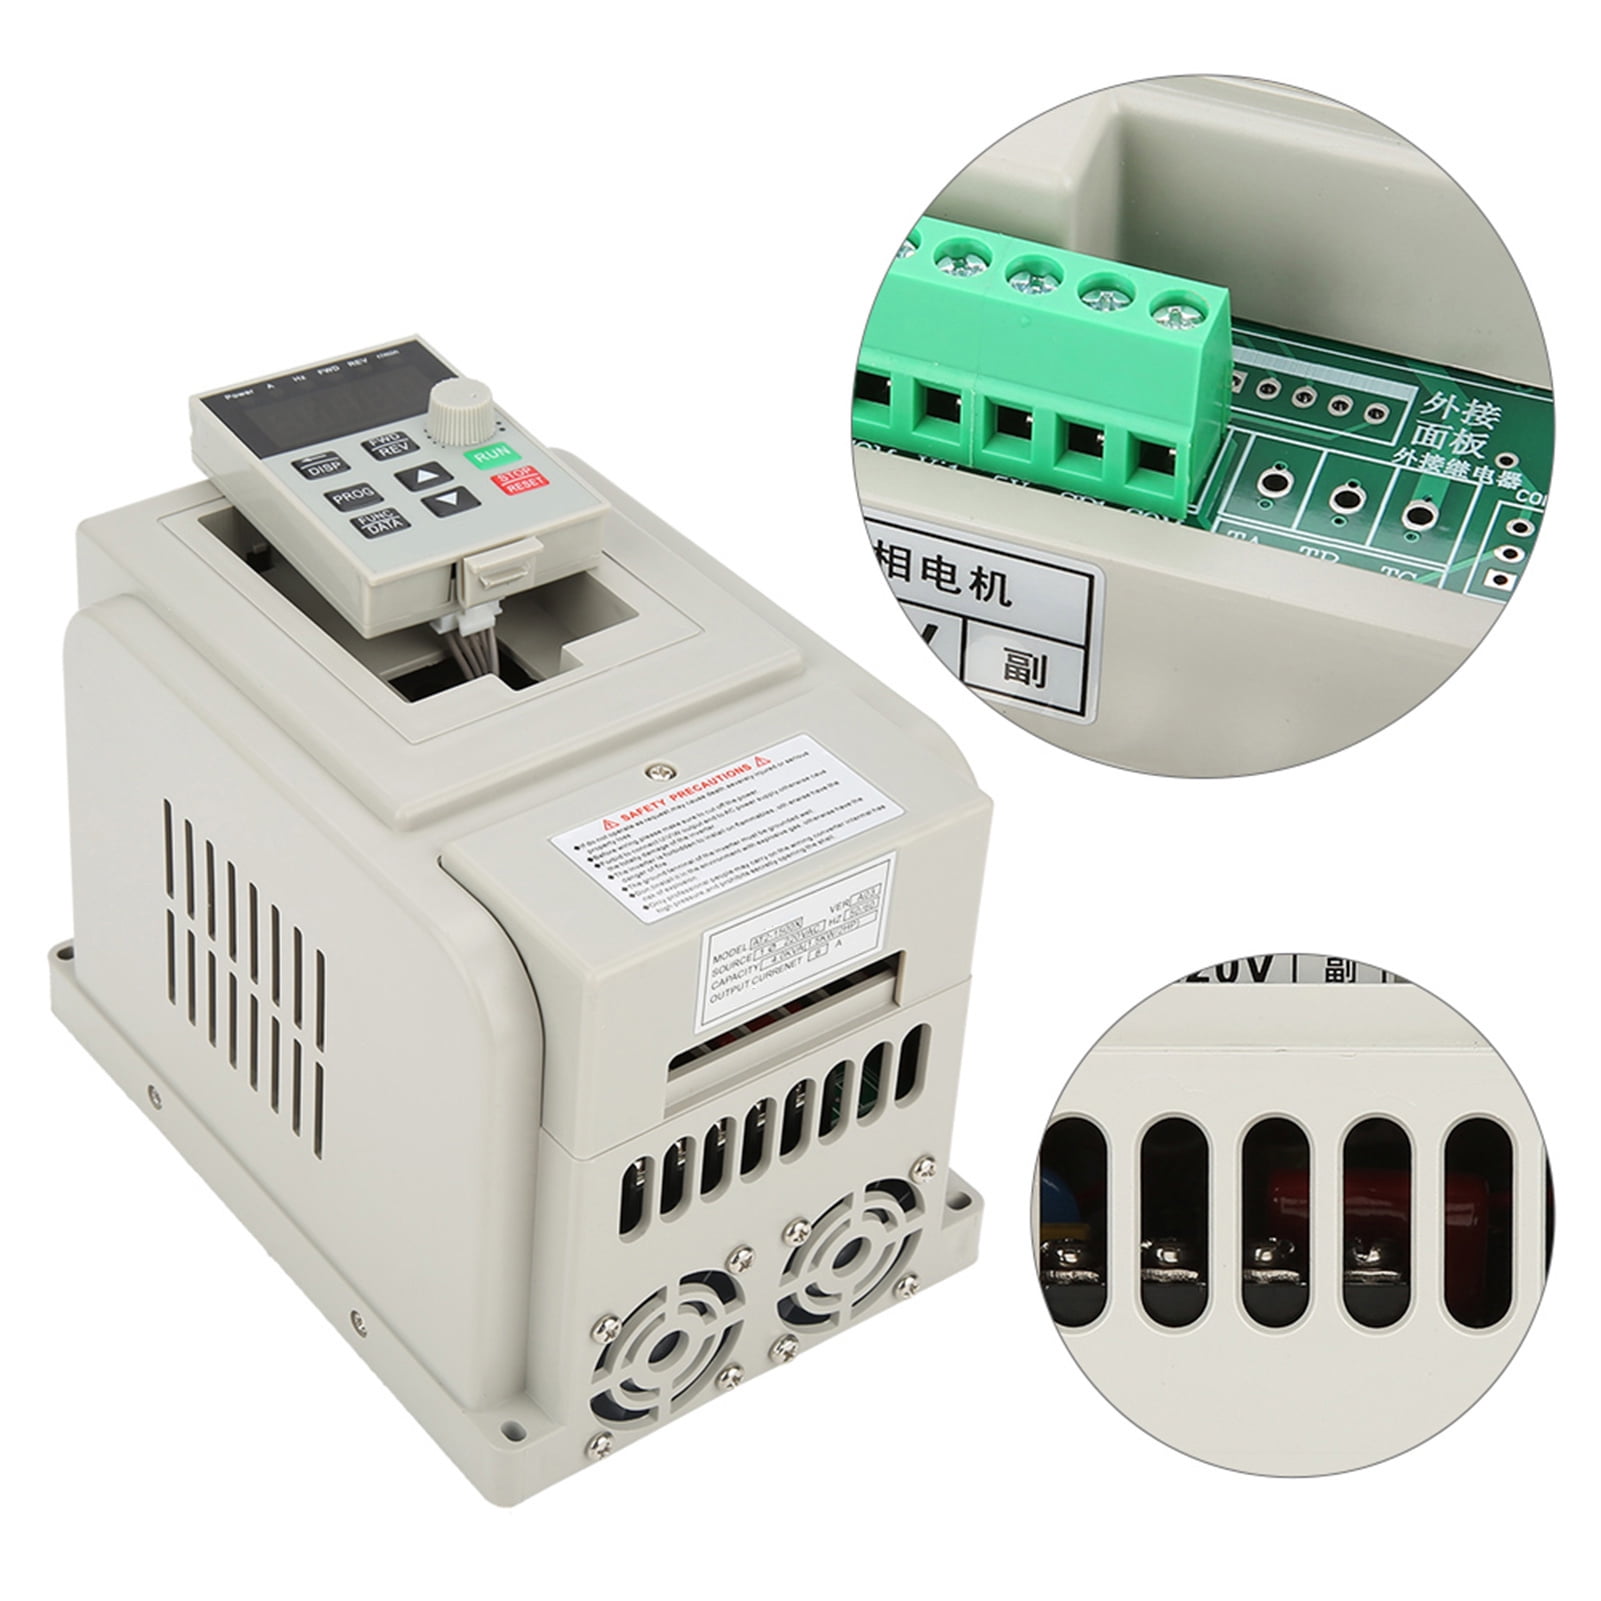 VFD Current Type AC 220V Automated Industry Sport Control for Industrial Supplies Industrial Control 1.5kW 8A Variable Speed Drive